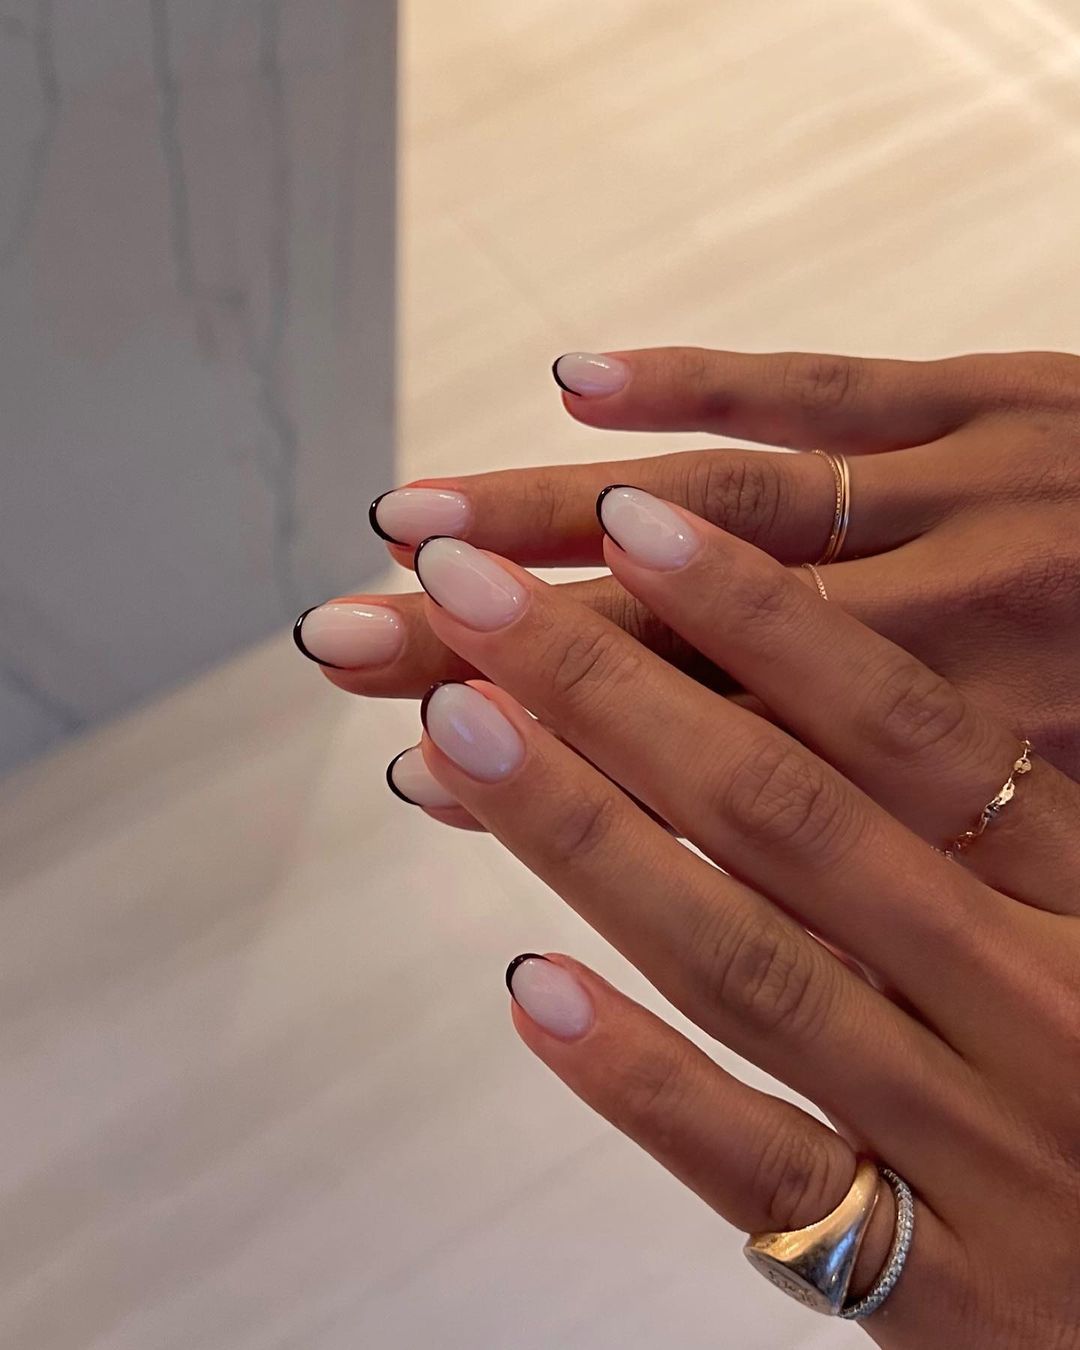 Milky Nails Are This Season's Chicest New Understated Nail Trend |  BEAUTY/crew